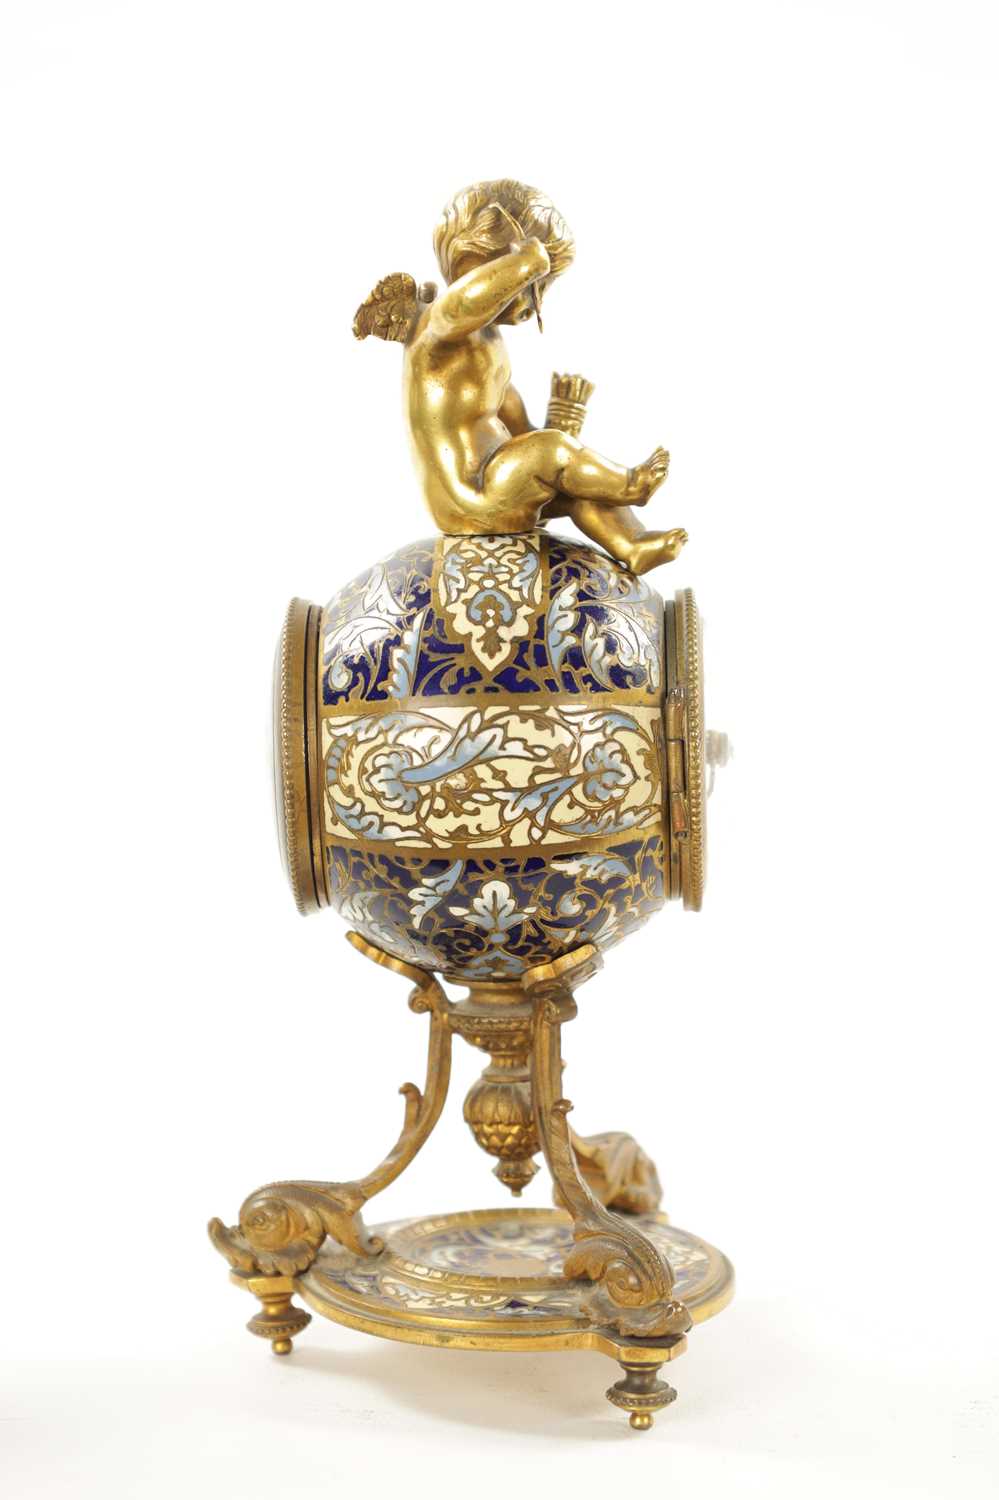 A LATE 19TH CENTURY FRENCH ORMOLU CHAMPLEVE ENAMEL MANTEL CLOCK - Image 7 of 8